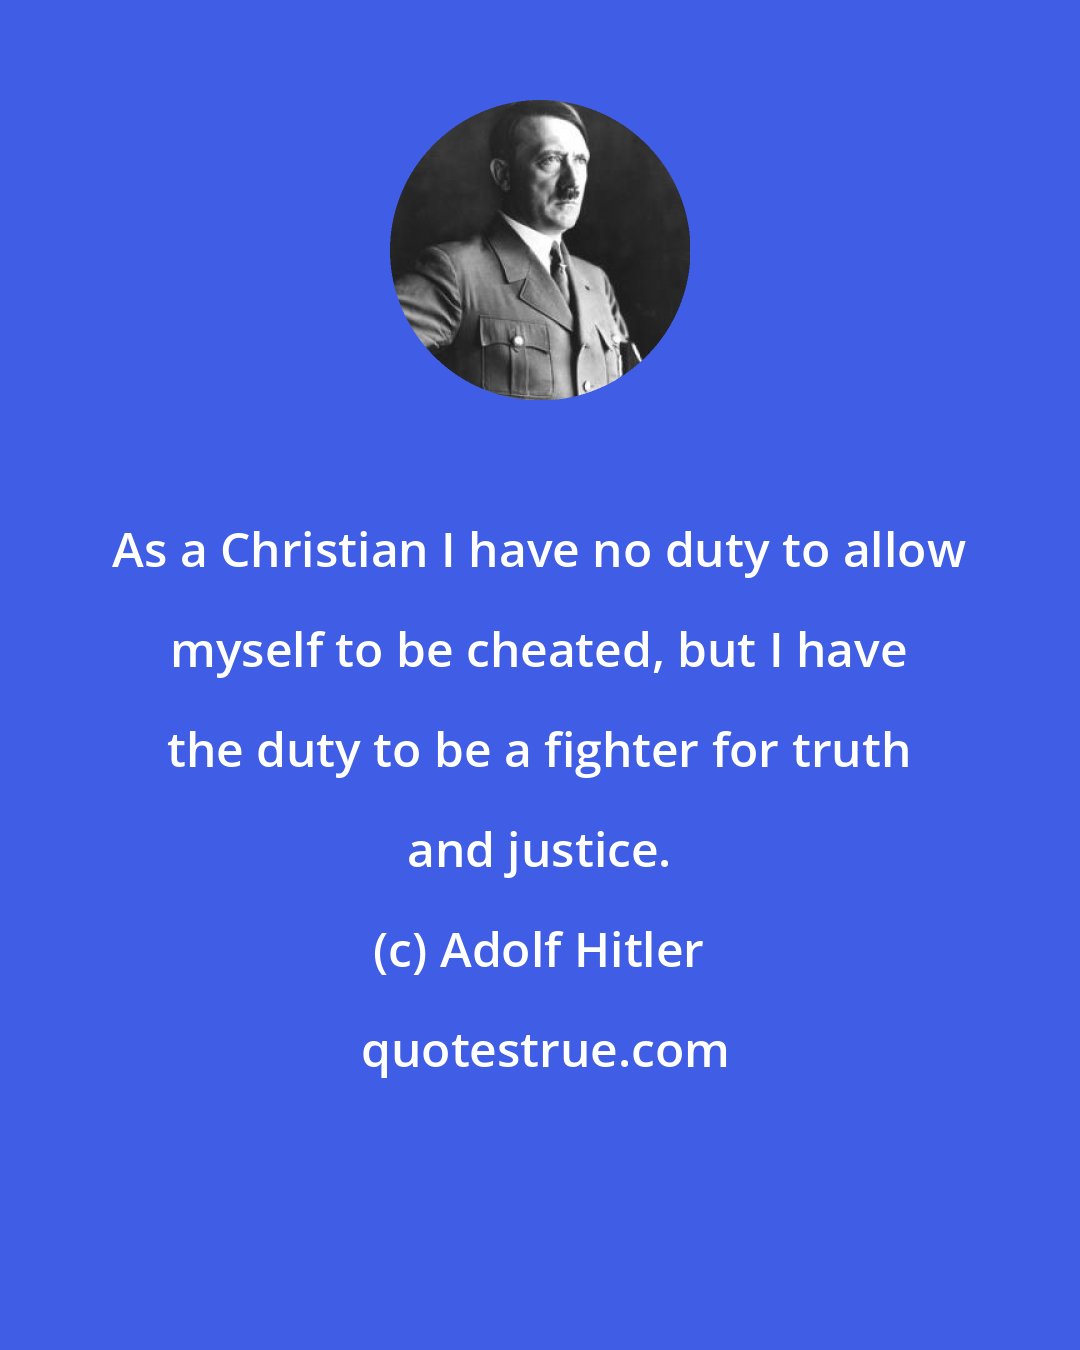 Adolf Hitler: As a Christian I have no duty to allow myself to be cheated, but I have the duty to be a fighter for truth and justice.